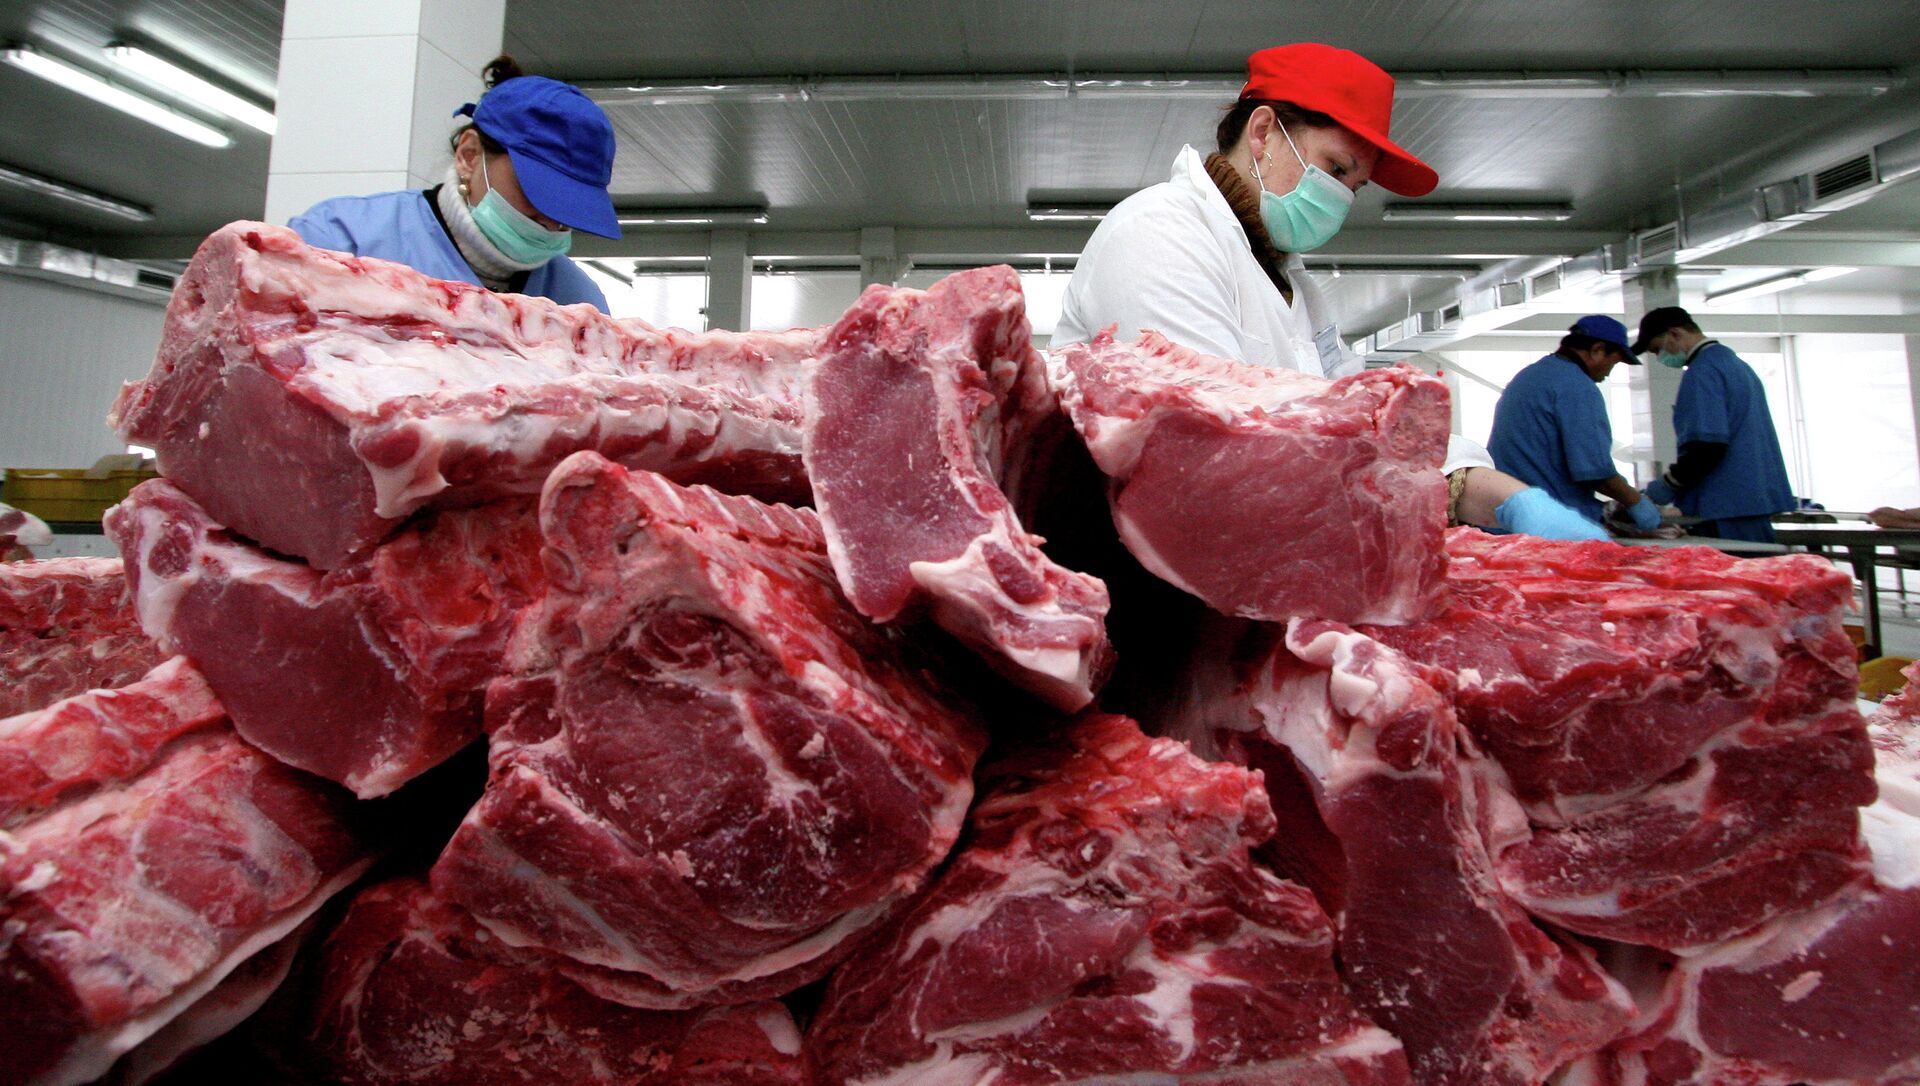 Russia Bans Meat Imports From Montenegro Over Re-export From EU: Watchdog - Sputnik Молдова, 1920, 27.05.2021